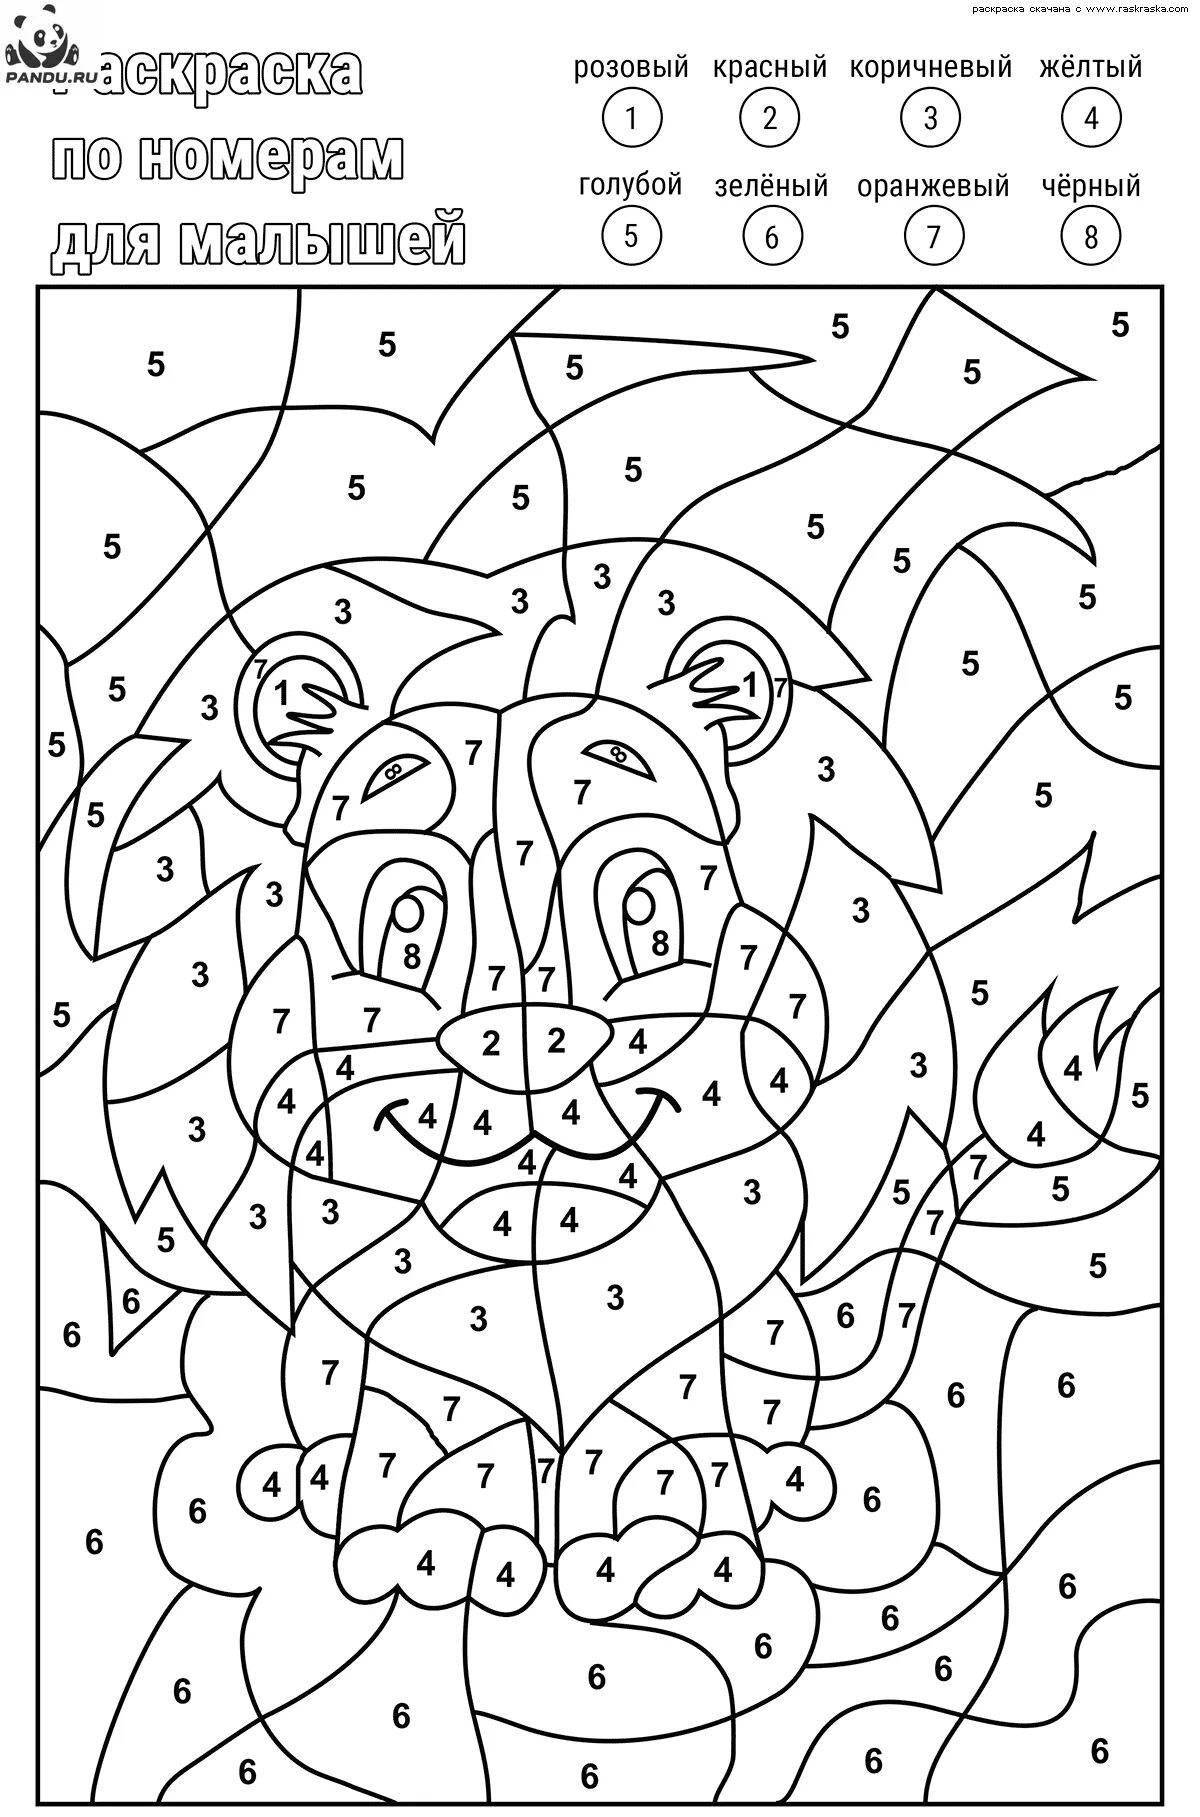 Intriguing phone games by numbers coloring book